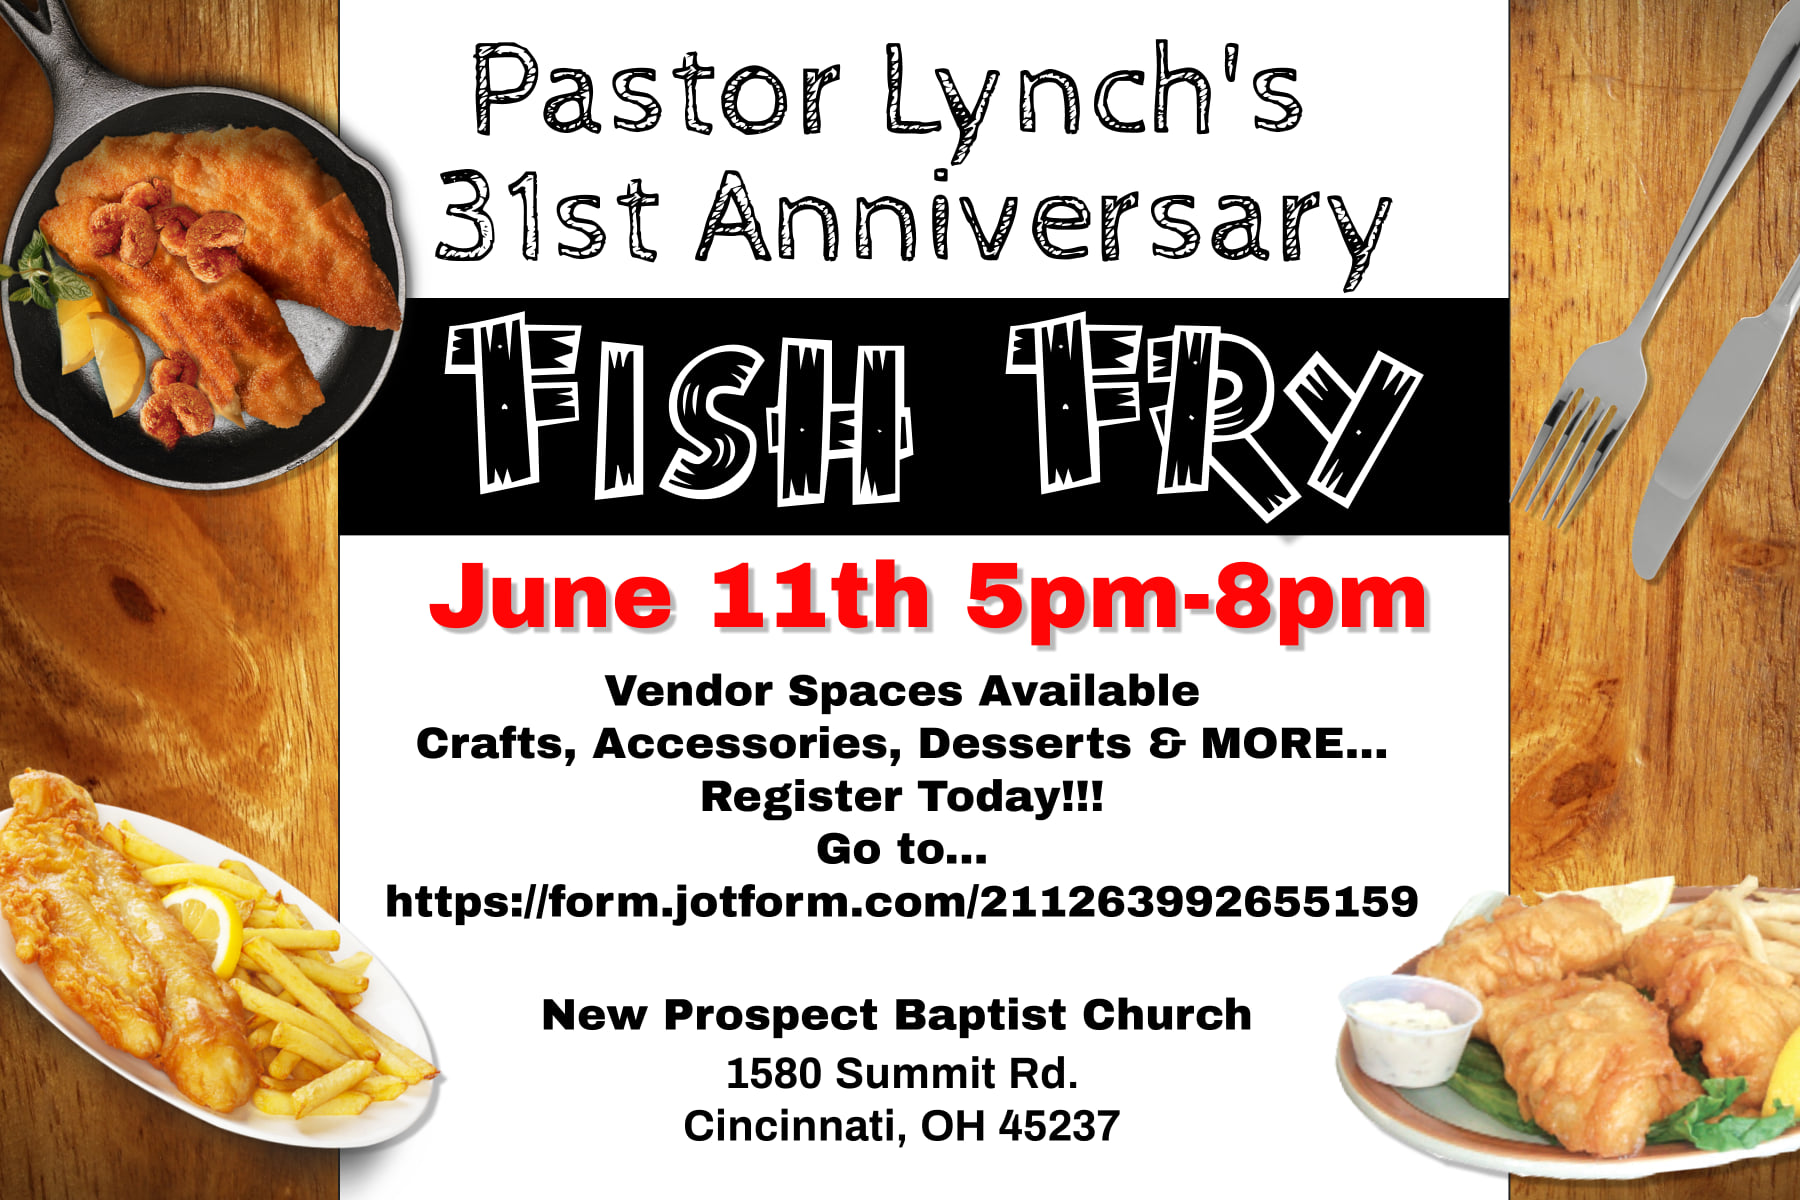 Fish Fry at New Prospect on Friday, June 11th 5 p.m. - 8 p.m.